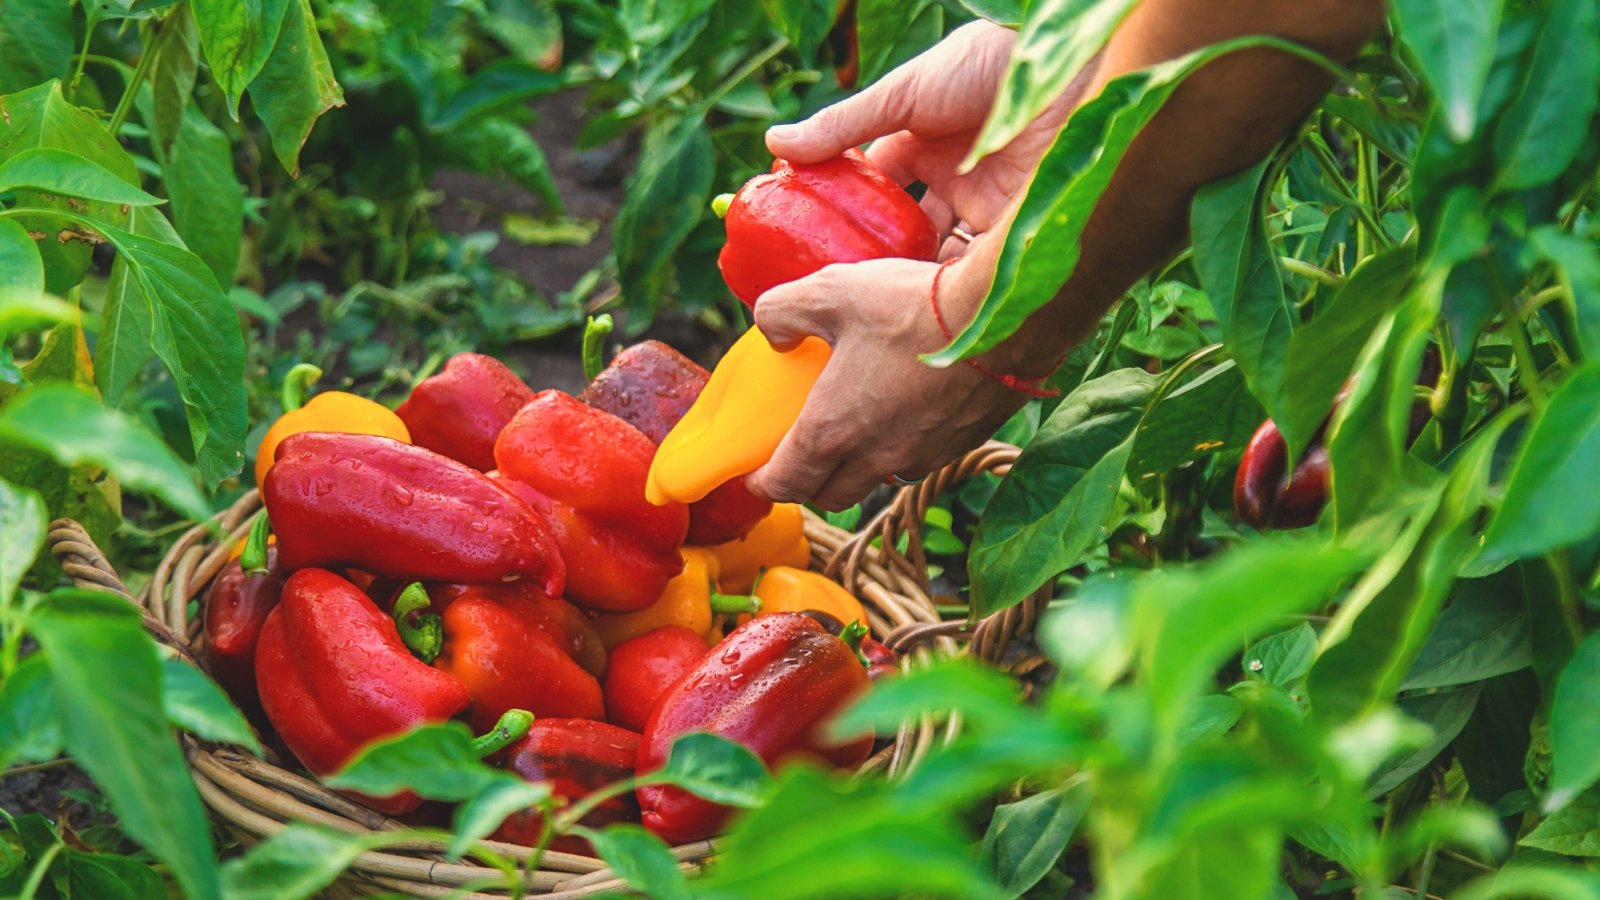 A close-up of a farmer's hands harvesting bright red and yellow sweet pepper fruits into a large wicker basket among the lush deciduous pepper bushes in a garden bed.